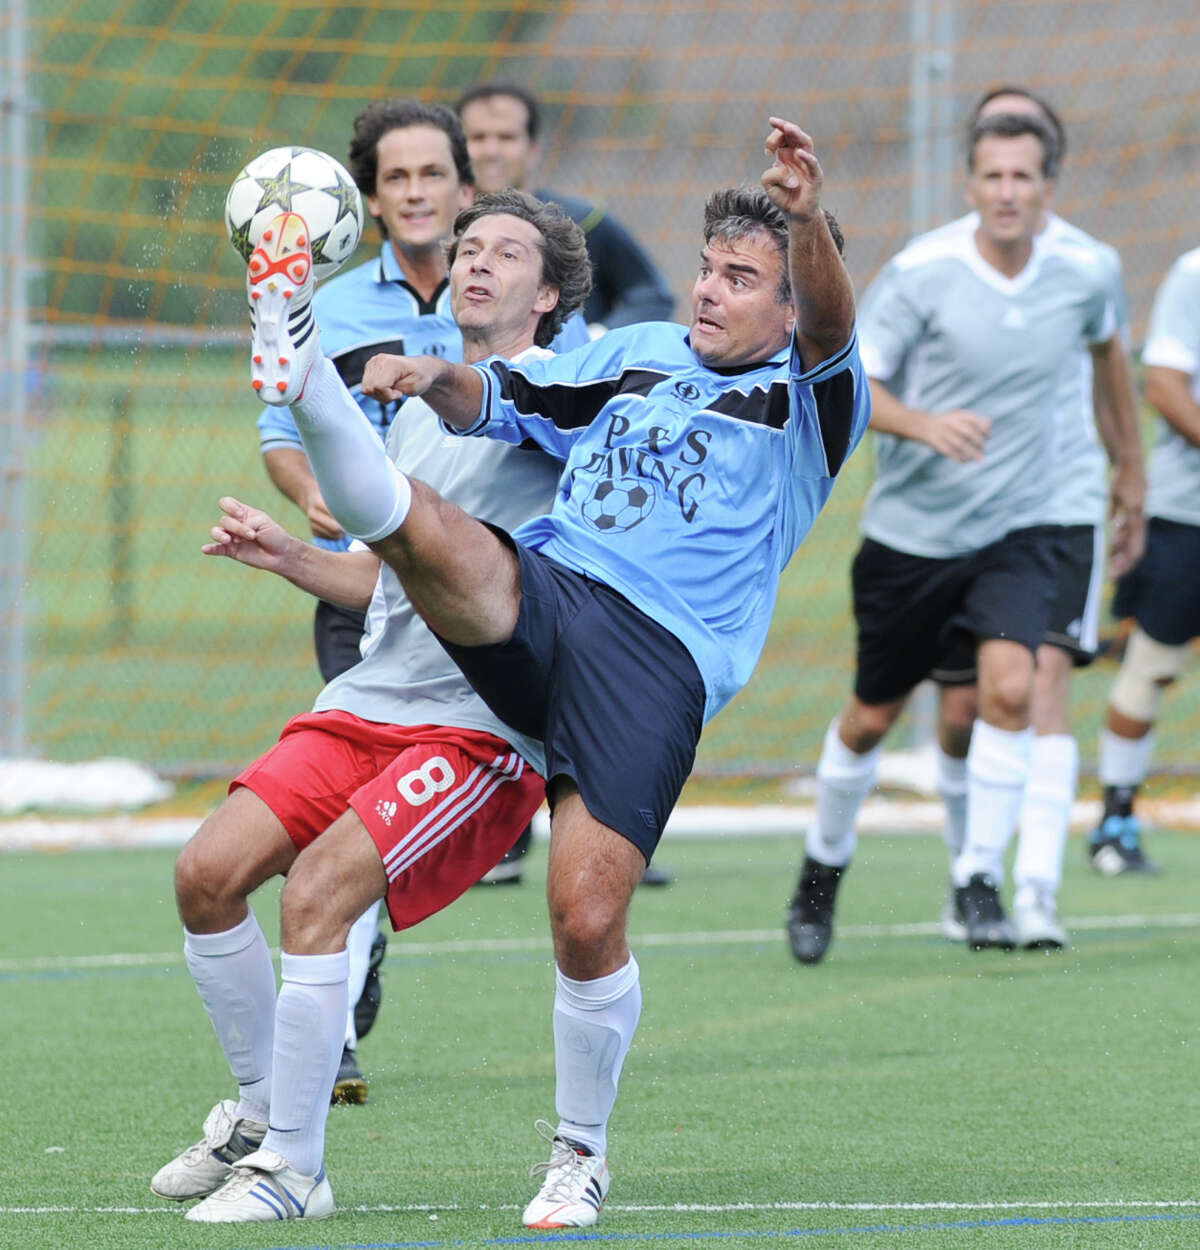 Passion for soccer brings together Argentinian expats